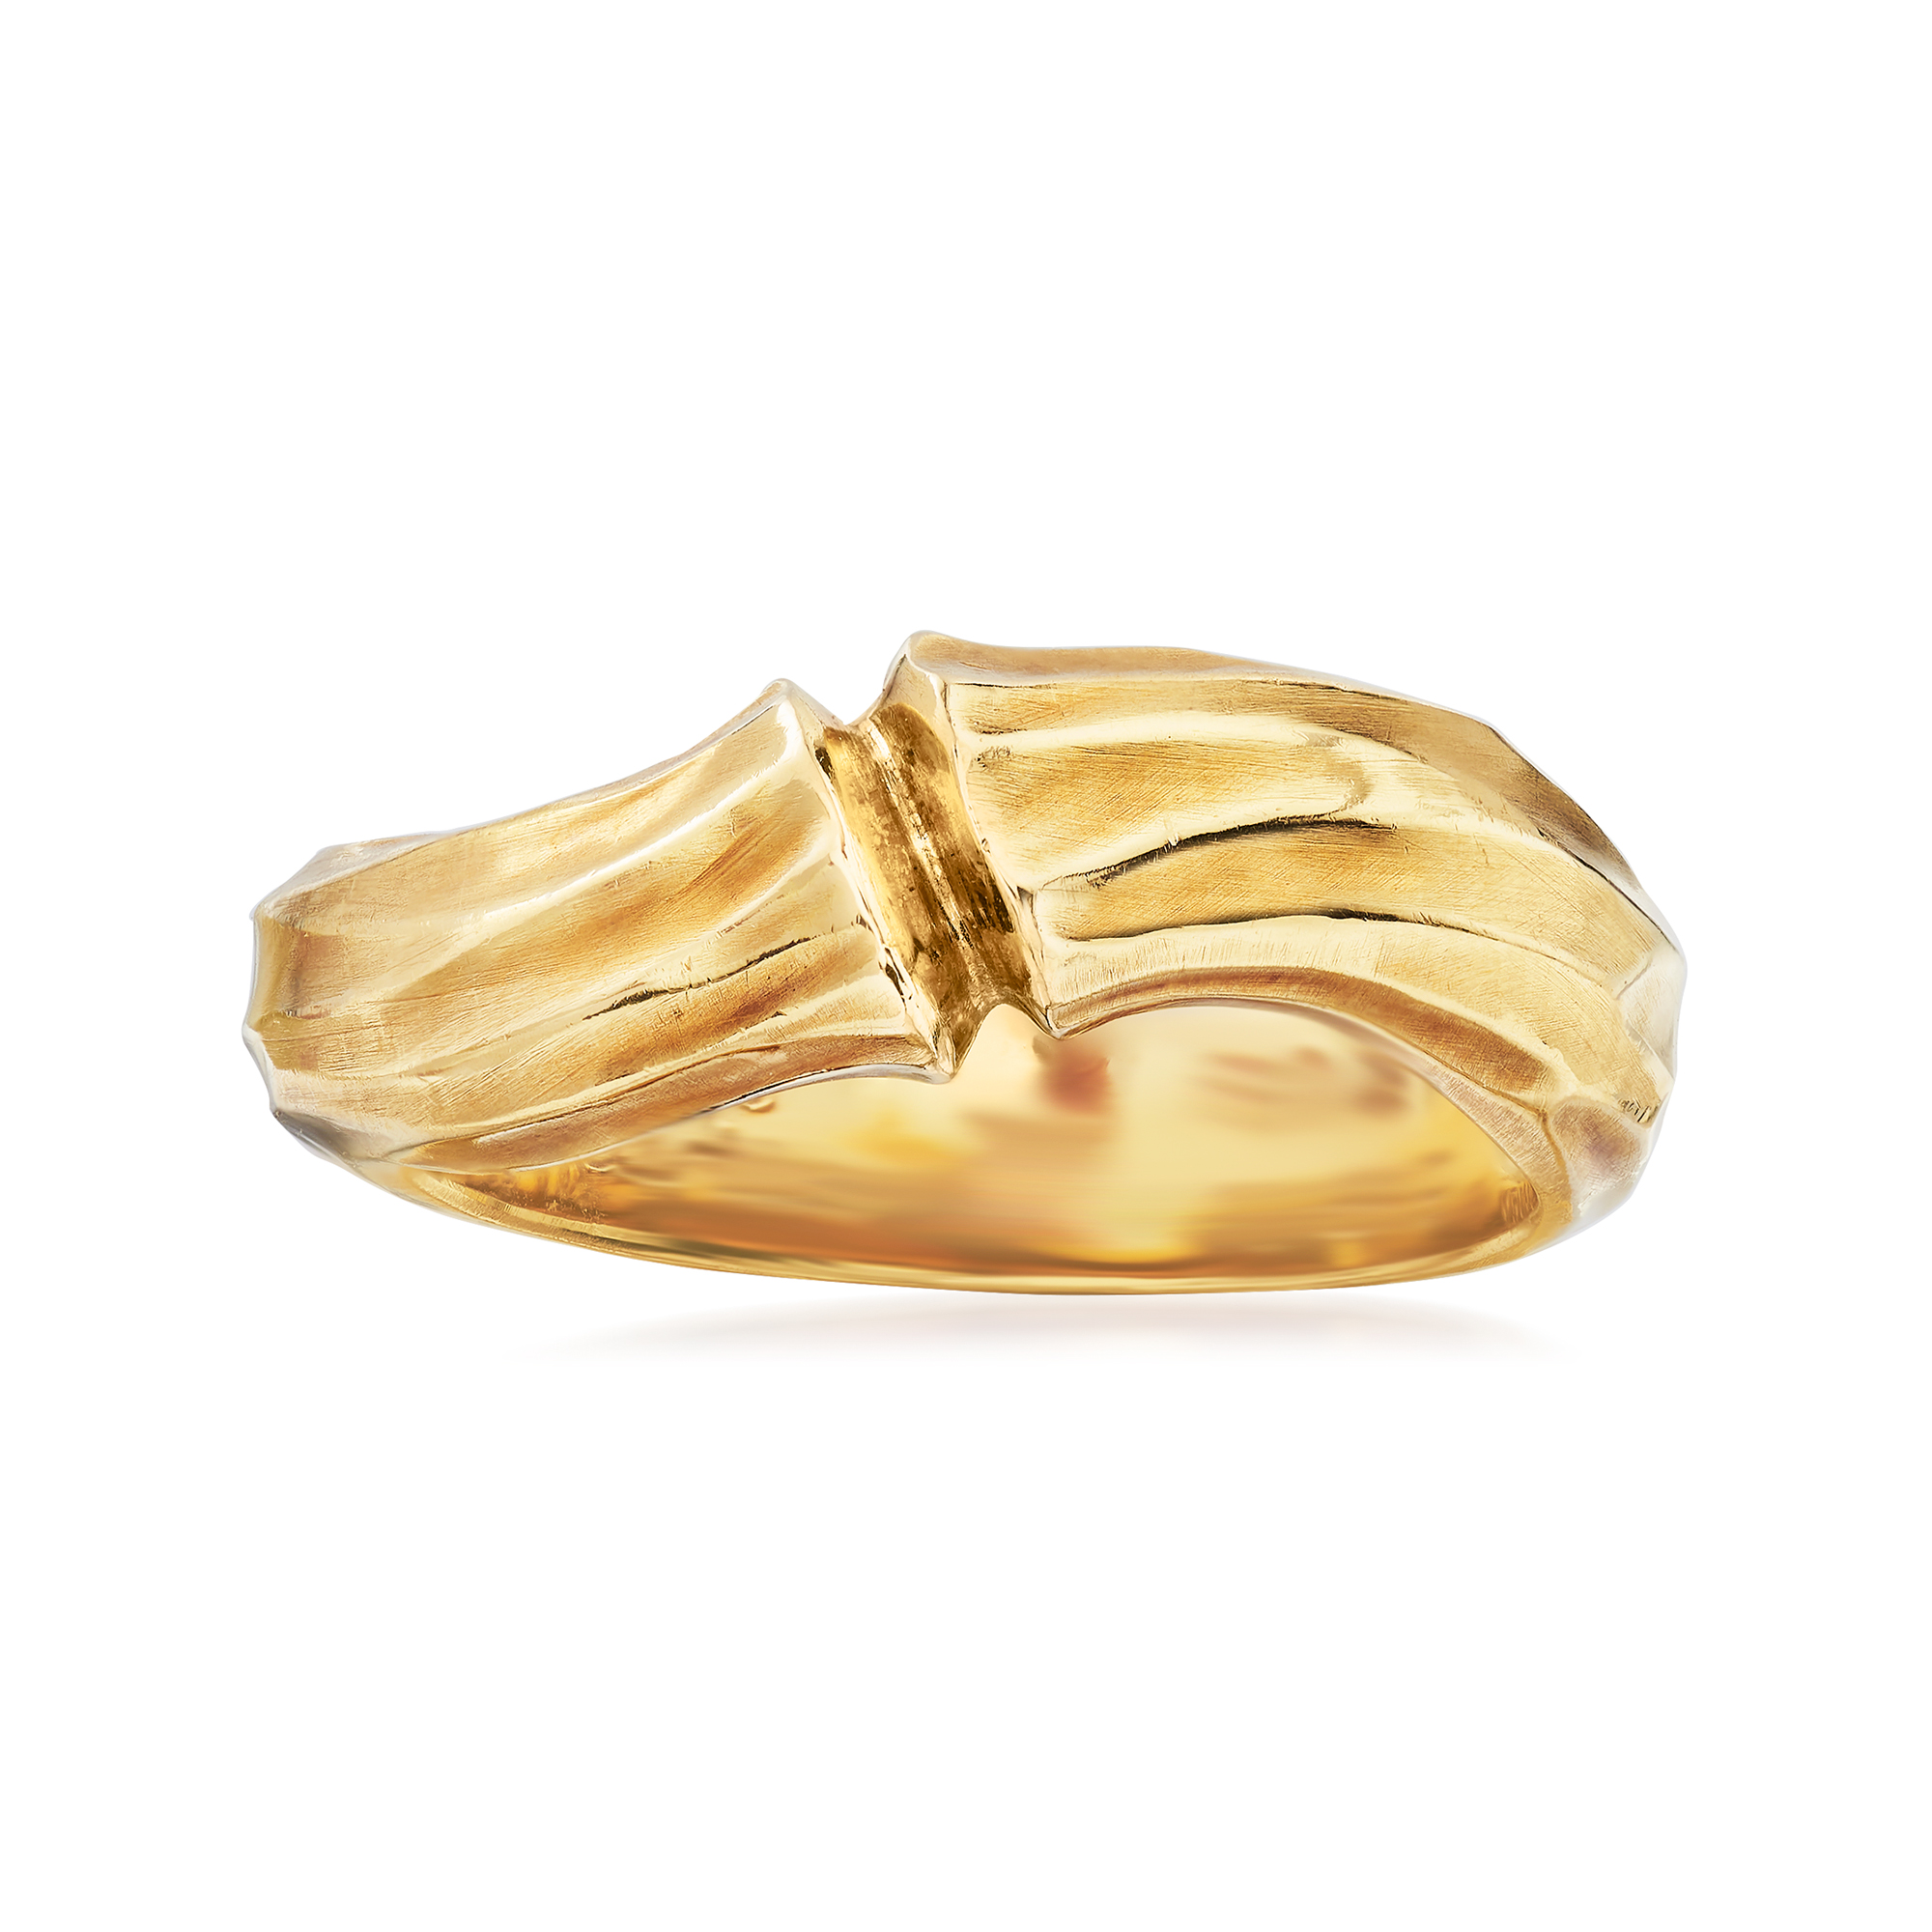 C. 1980 Vintage Cartier 18kt Yellow Gold Bamboo Ring | Ross-Simons